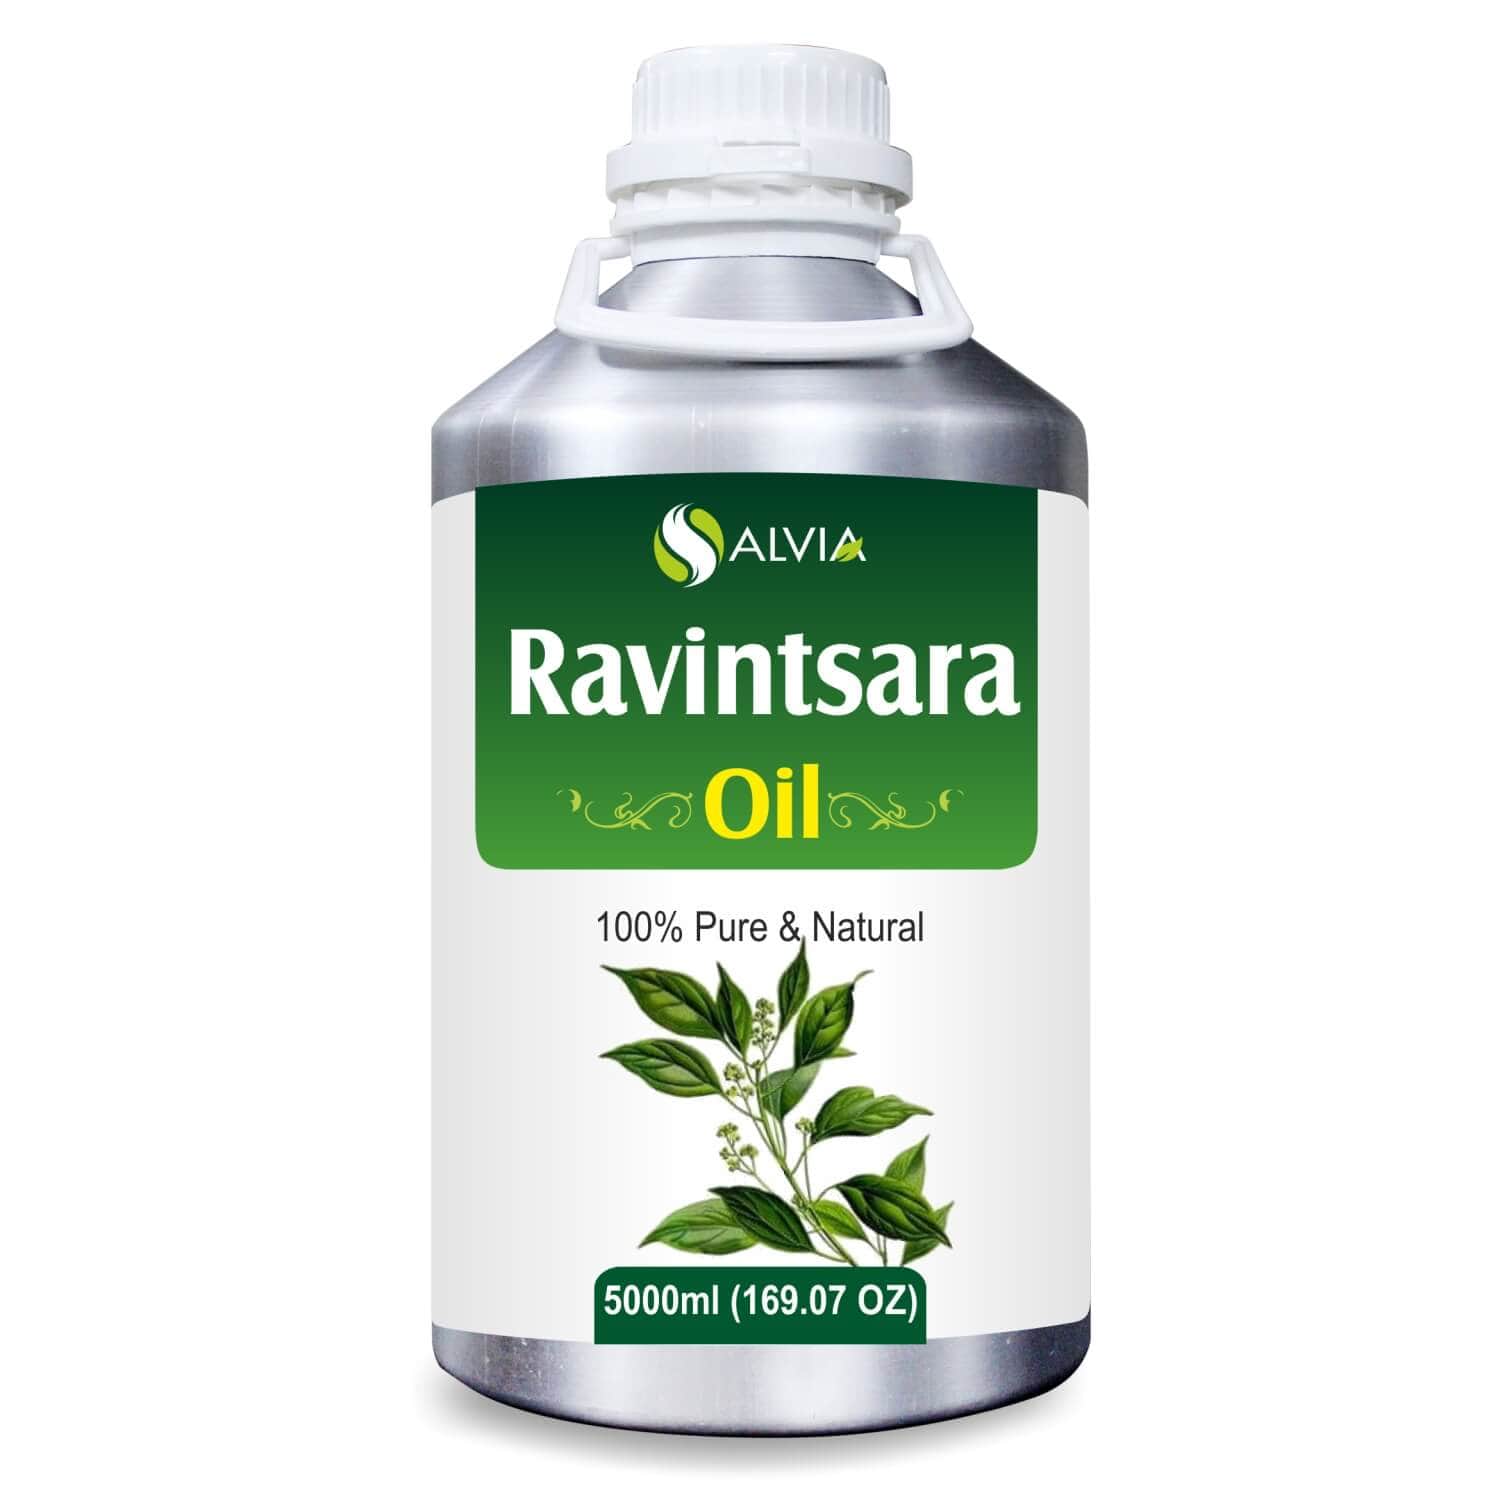 Salvia Natural Essential Oils 5000ml Ravintsara Oil (Cinnamomum Camphora) 100% Natural Undiluted Essential Oil Releases Stress & Tension, Antiviral Properties, Aromatherapy, Relieve Cold & Cough